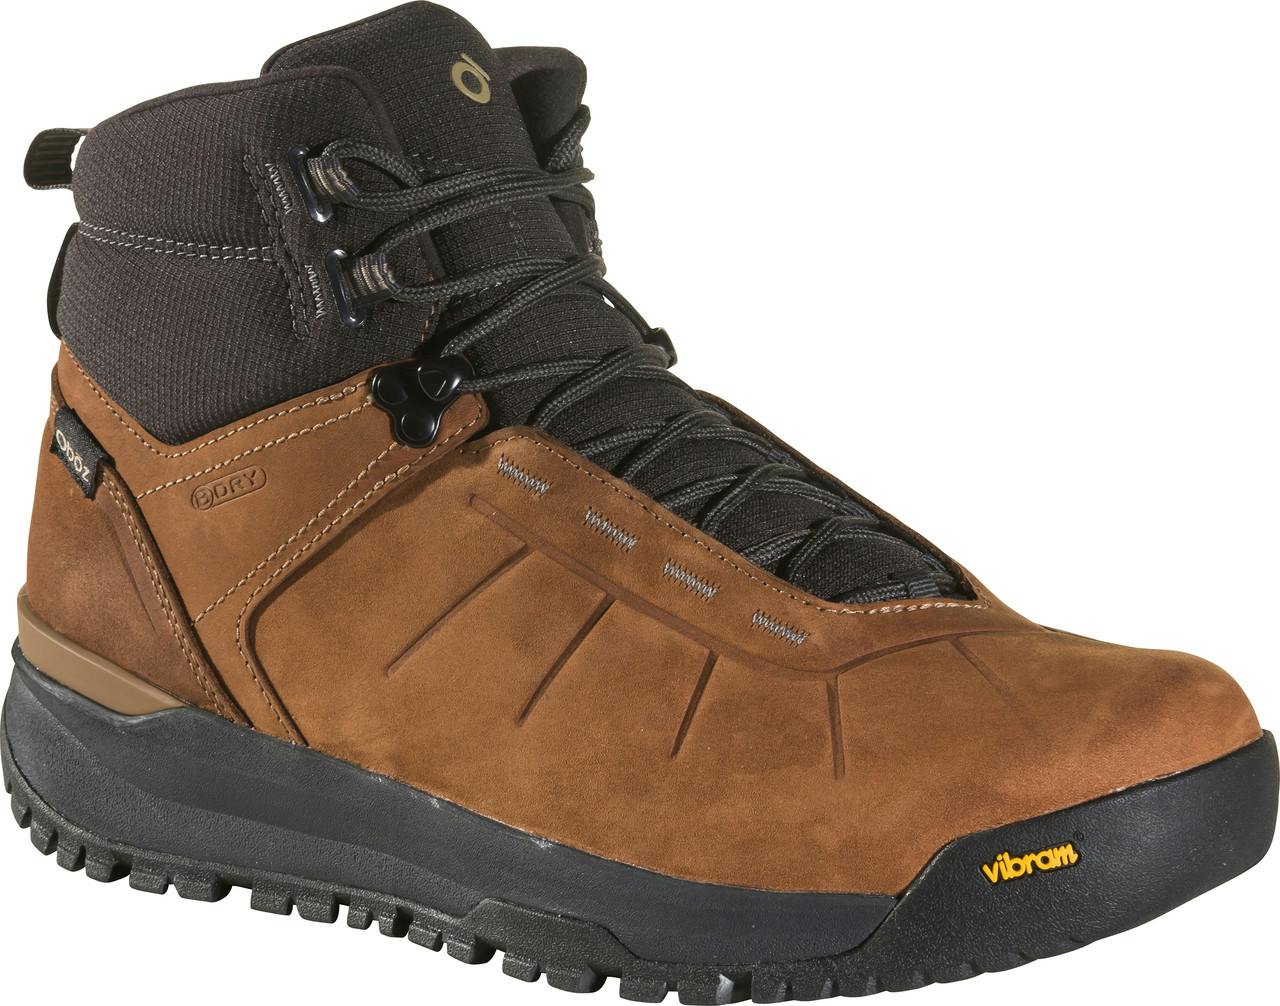 Andesite Insulated B-Dry Mid Light Trail Shoe Dachshund